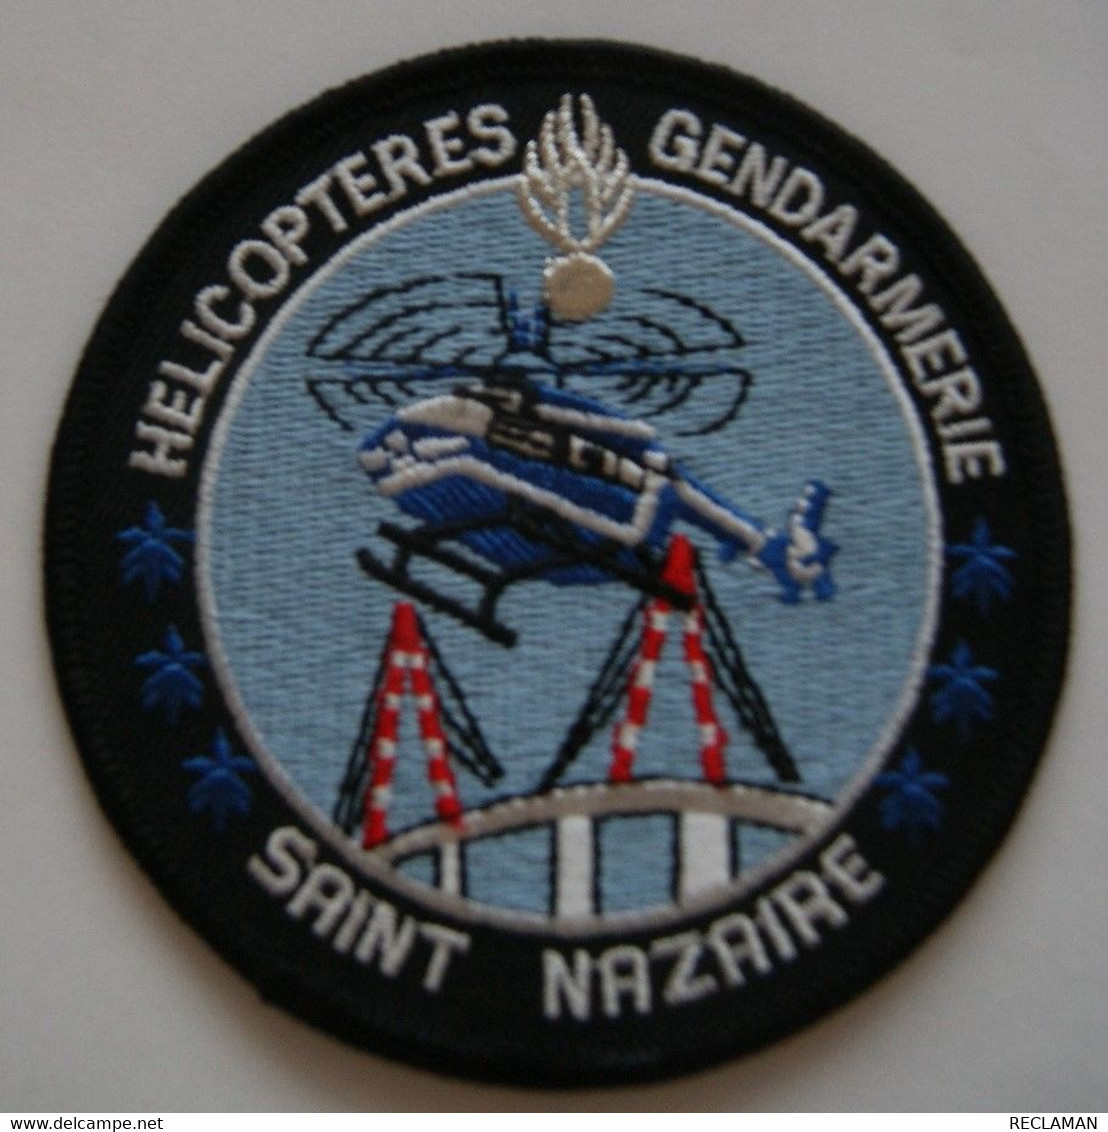 PATCH ECUSSON INSIGNE TISSUS HELICOPTERES GENDARMERIE SAINT NAZAIRE HELICOPTERE VERSION 1 - Police